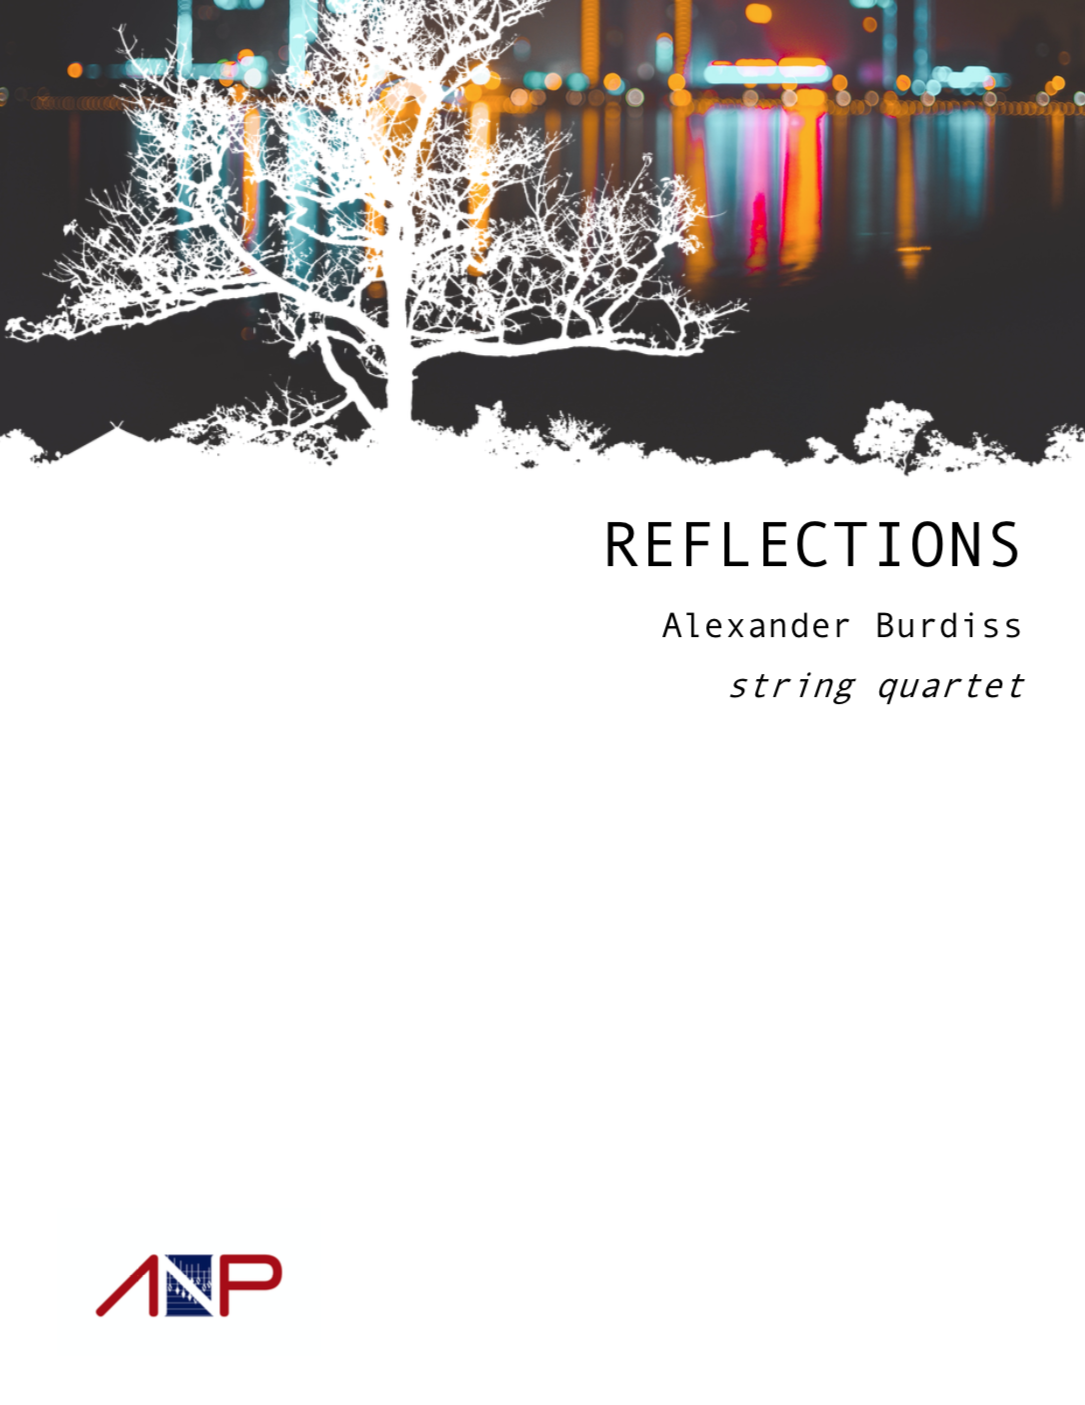 Reflections Composition Cover